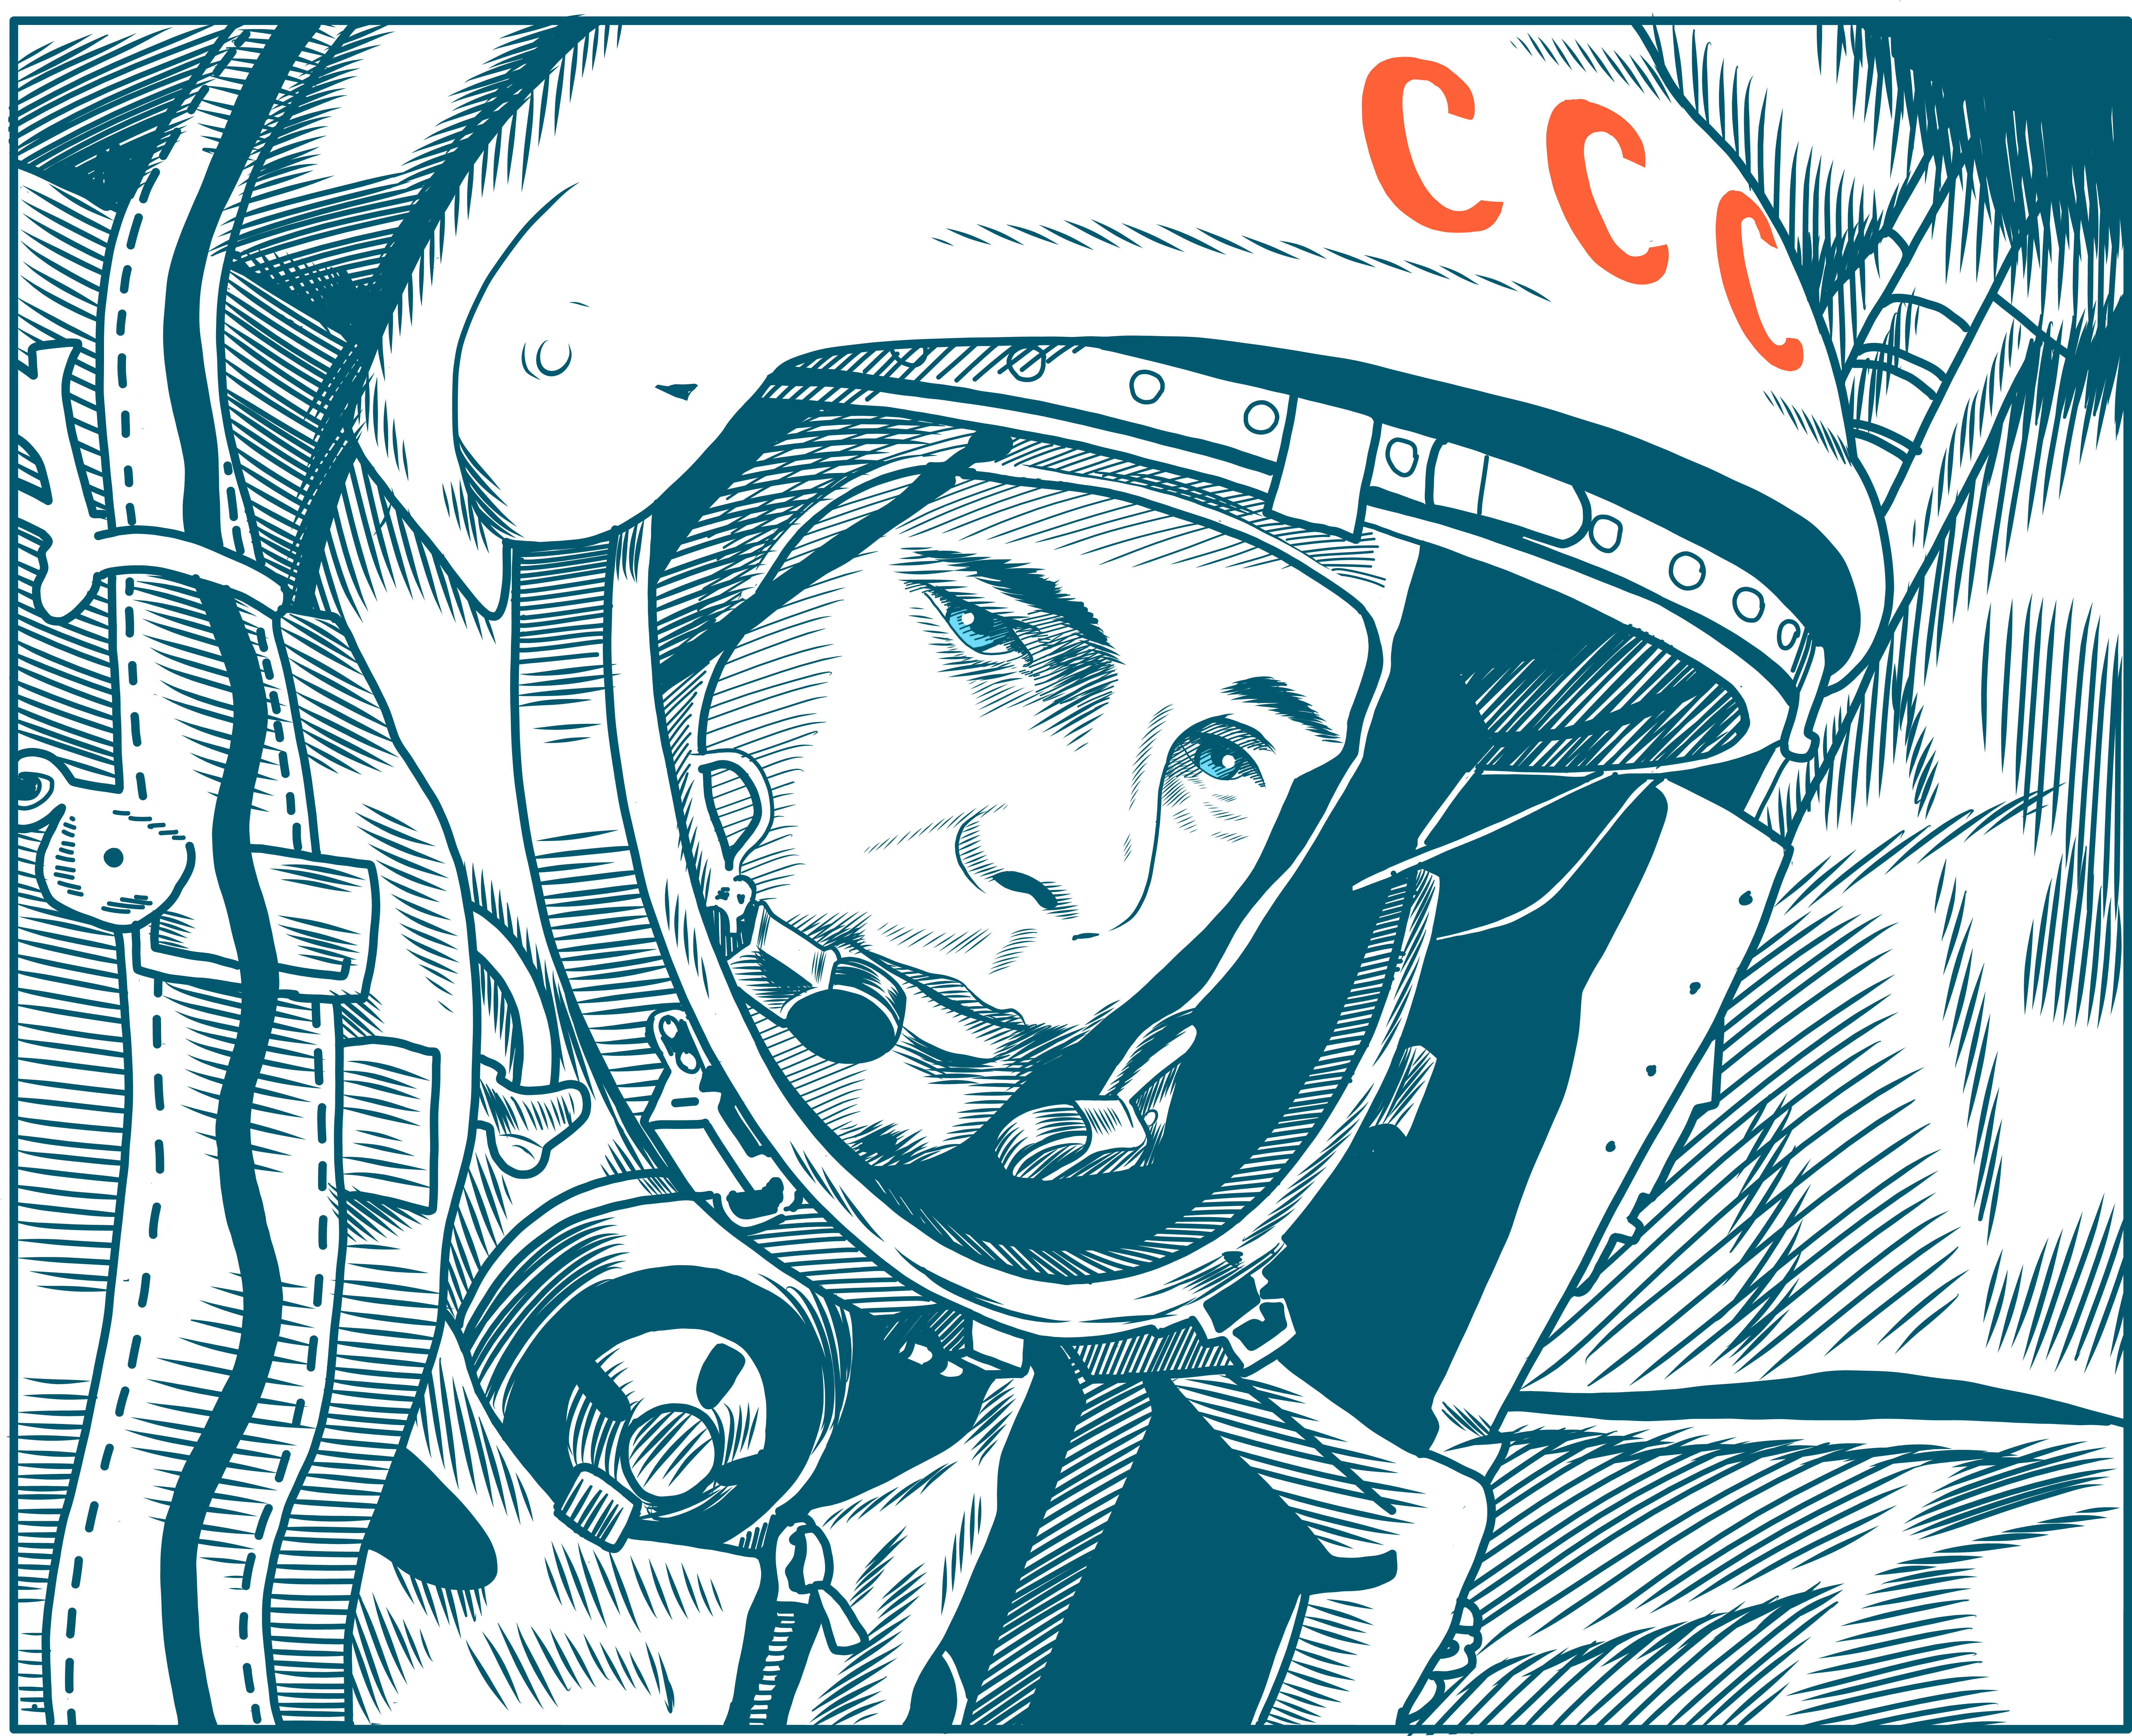 On this day 60 years ago, Yuri Gagarin became the first human to travel to space.